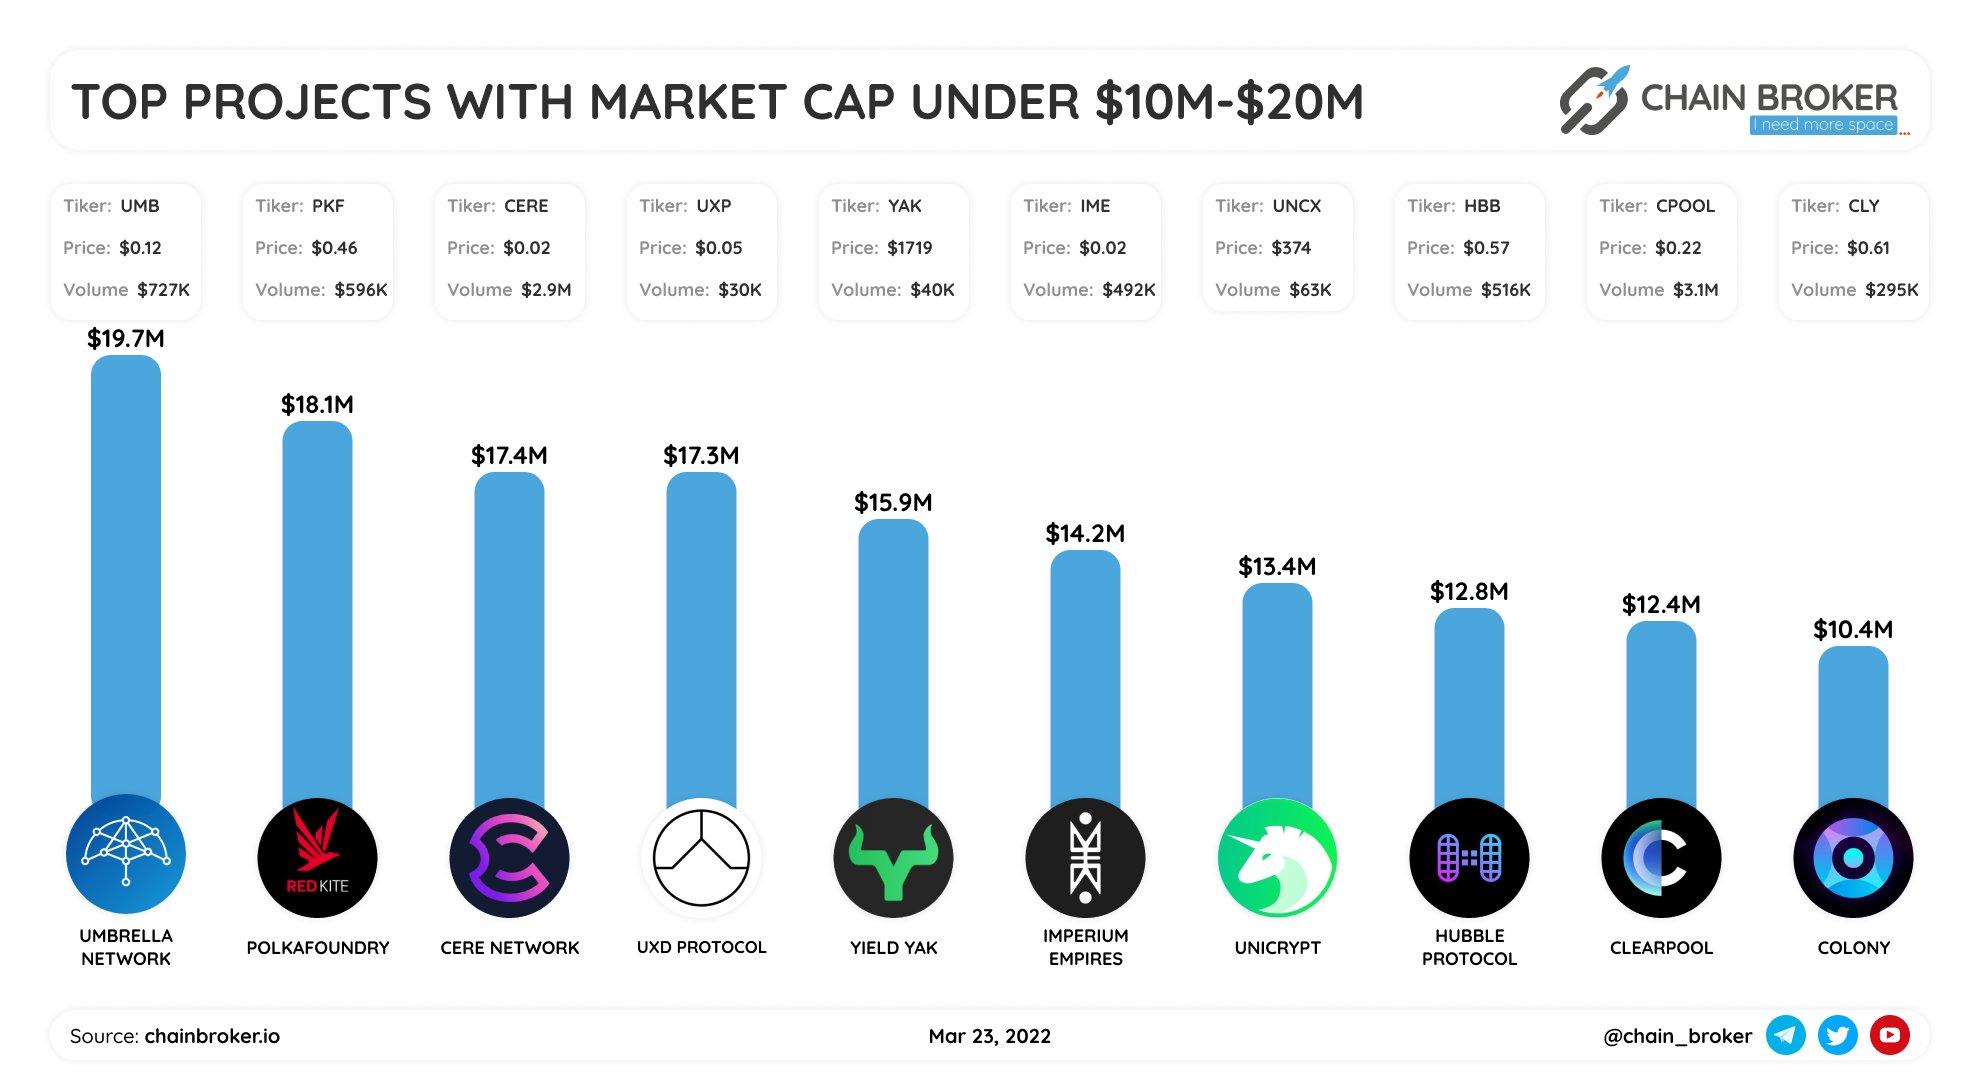 Top projects with market cap $10M-$20M